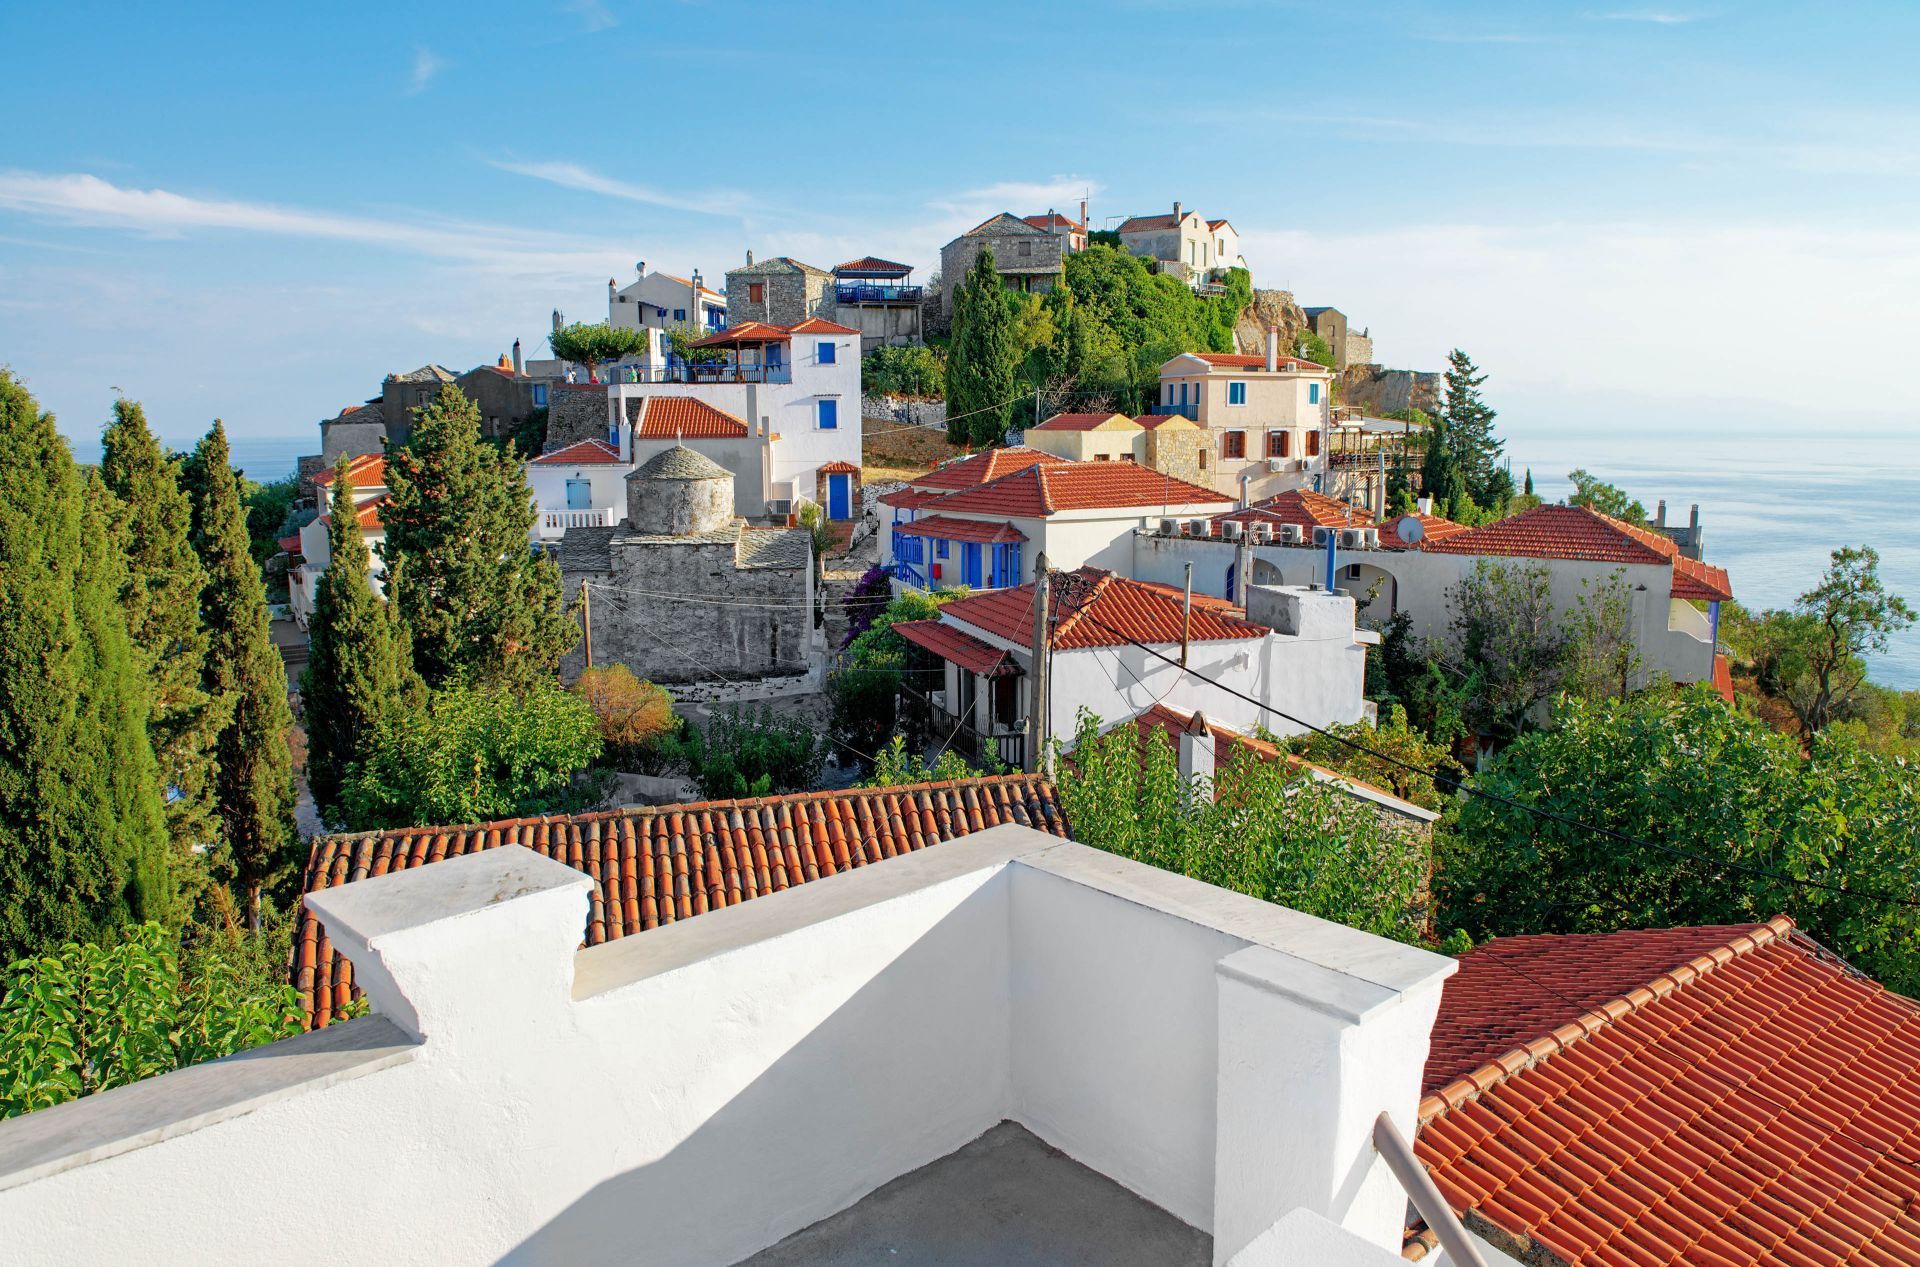 Chora, the old town of Alonissos island